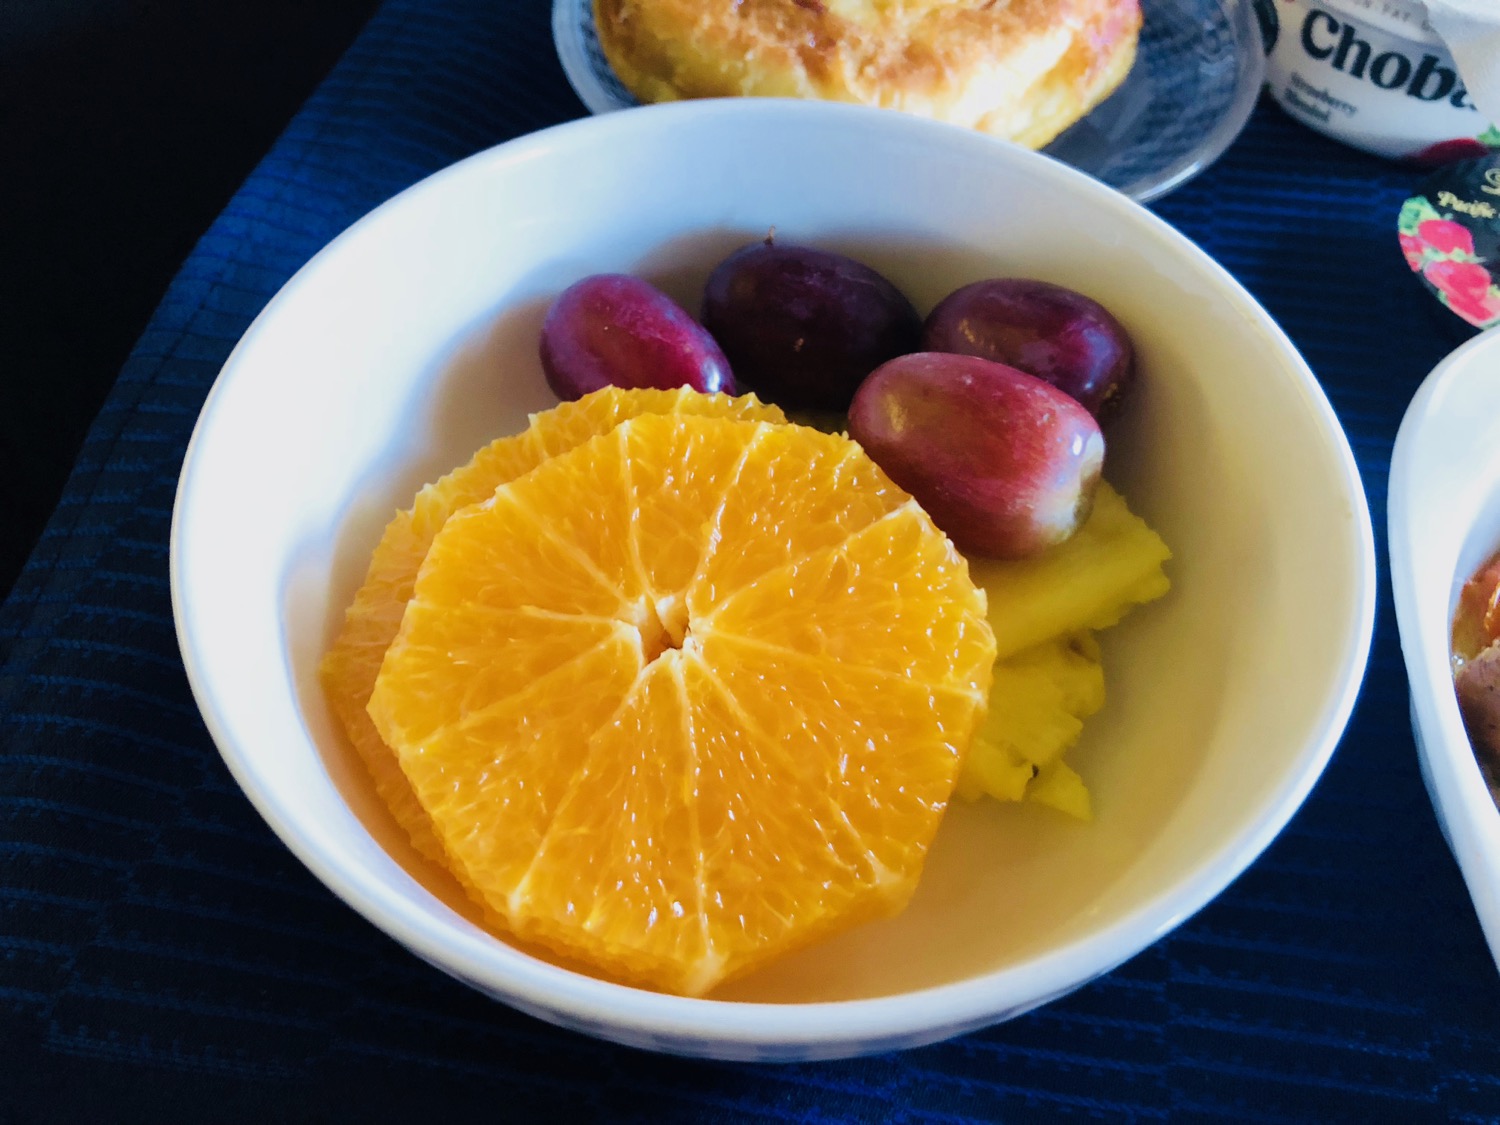 a bowl of fruit and a bagel